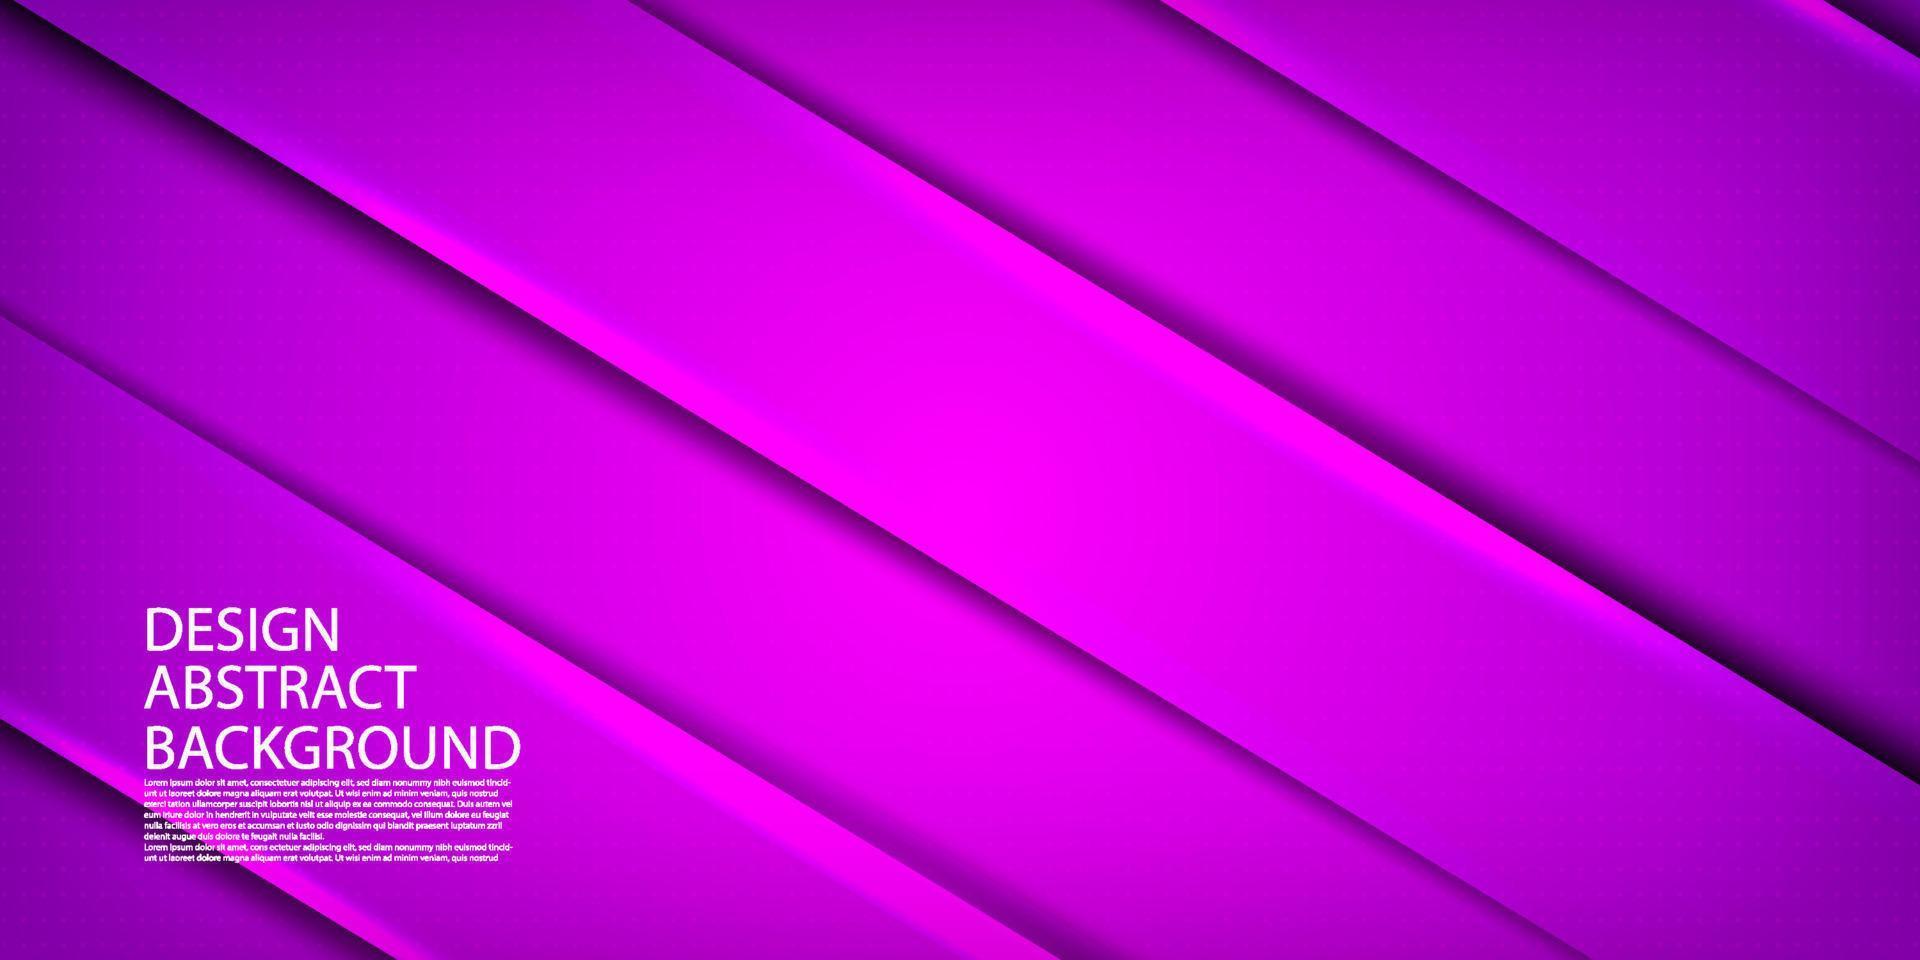 abstract pink violet background with shine . 3d look and cool design . illustration eps10 vector